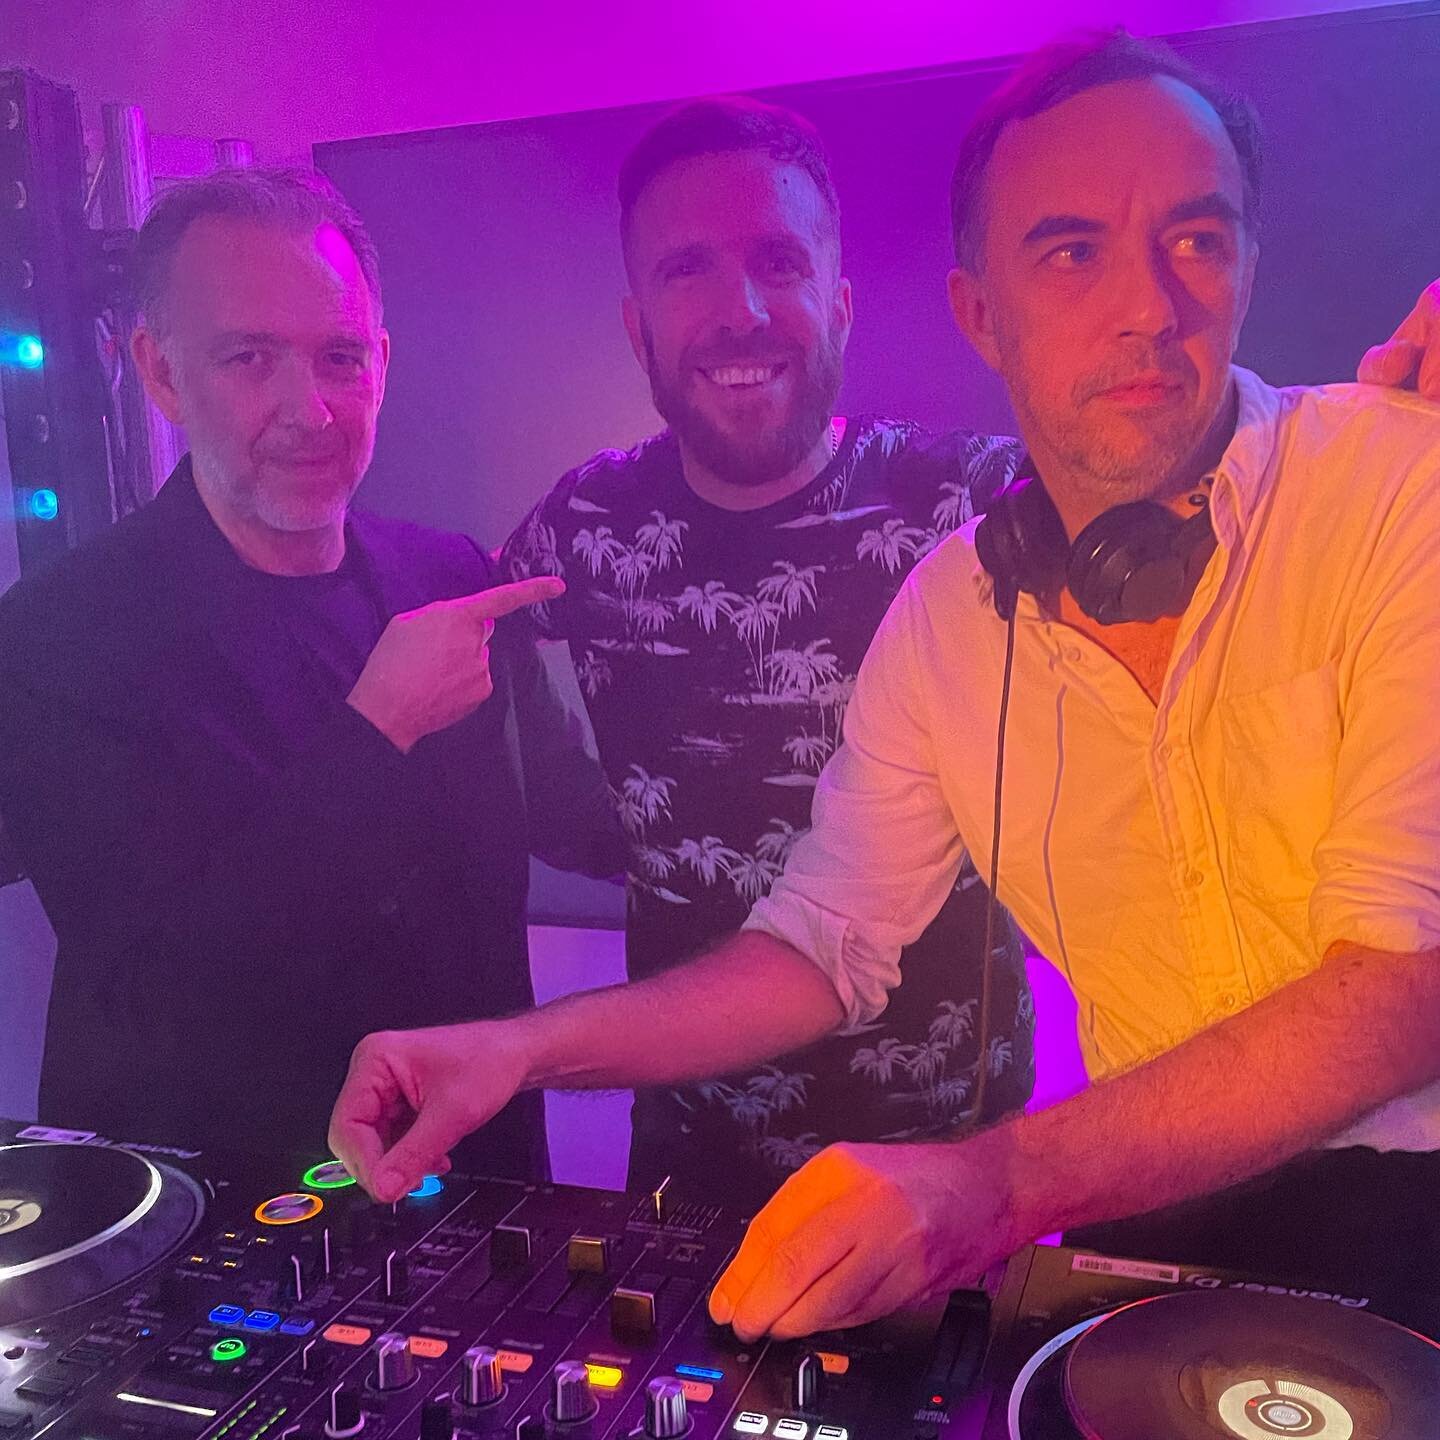 The most brilliant weekend!
Friday night I got to warm up for and then DJ straight after @2manydjs - just the coolest, friendliest, funniest guys! Oh and they&rsquo;re not bad behind the decks as well it turns out 😂. Brilliant 40th birthday bash ove